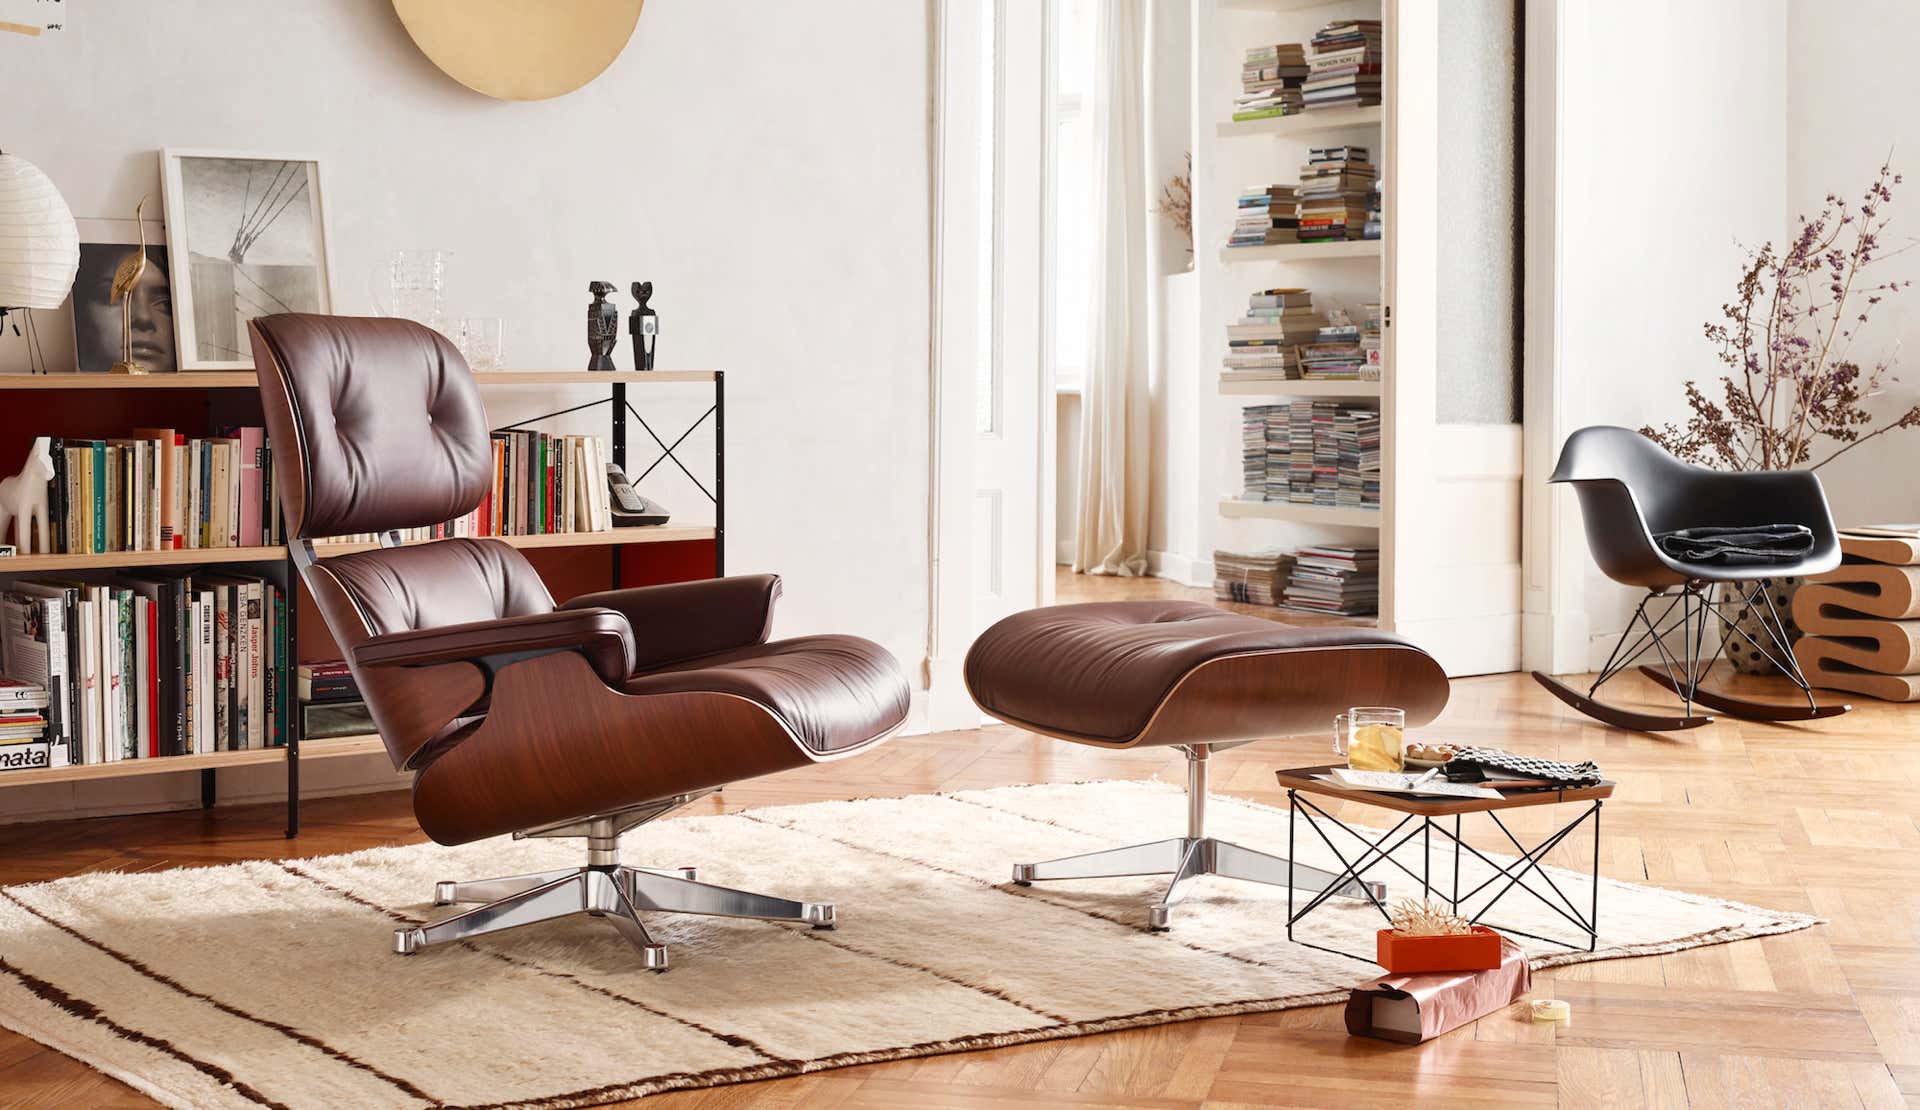 Eames Lounge Chair Charles & Ray Eames, 1956